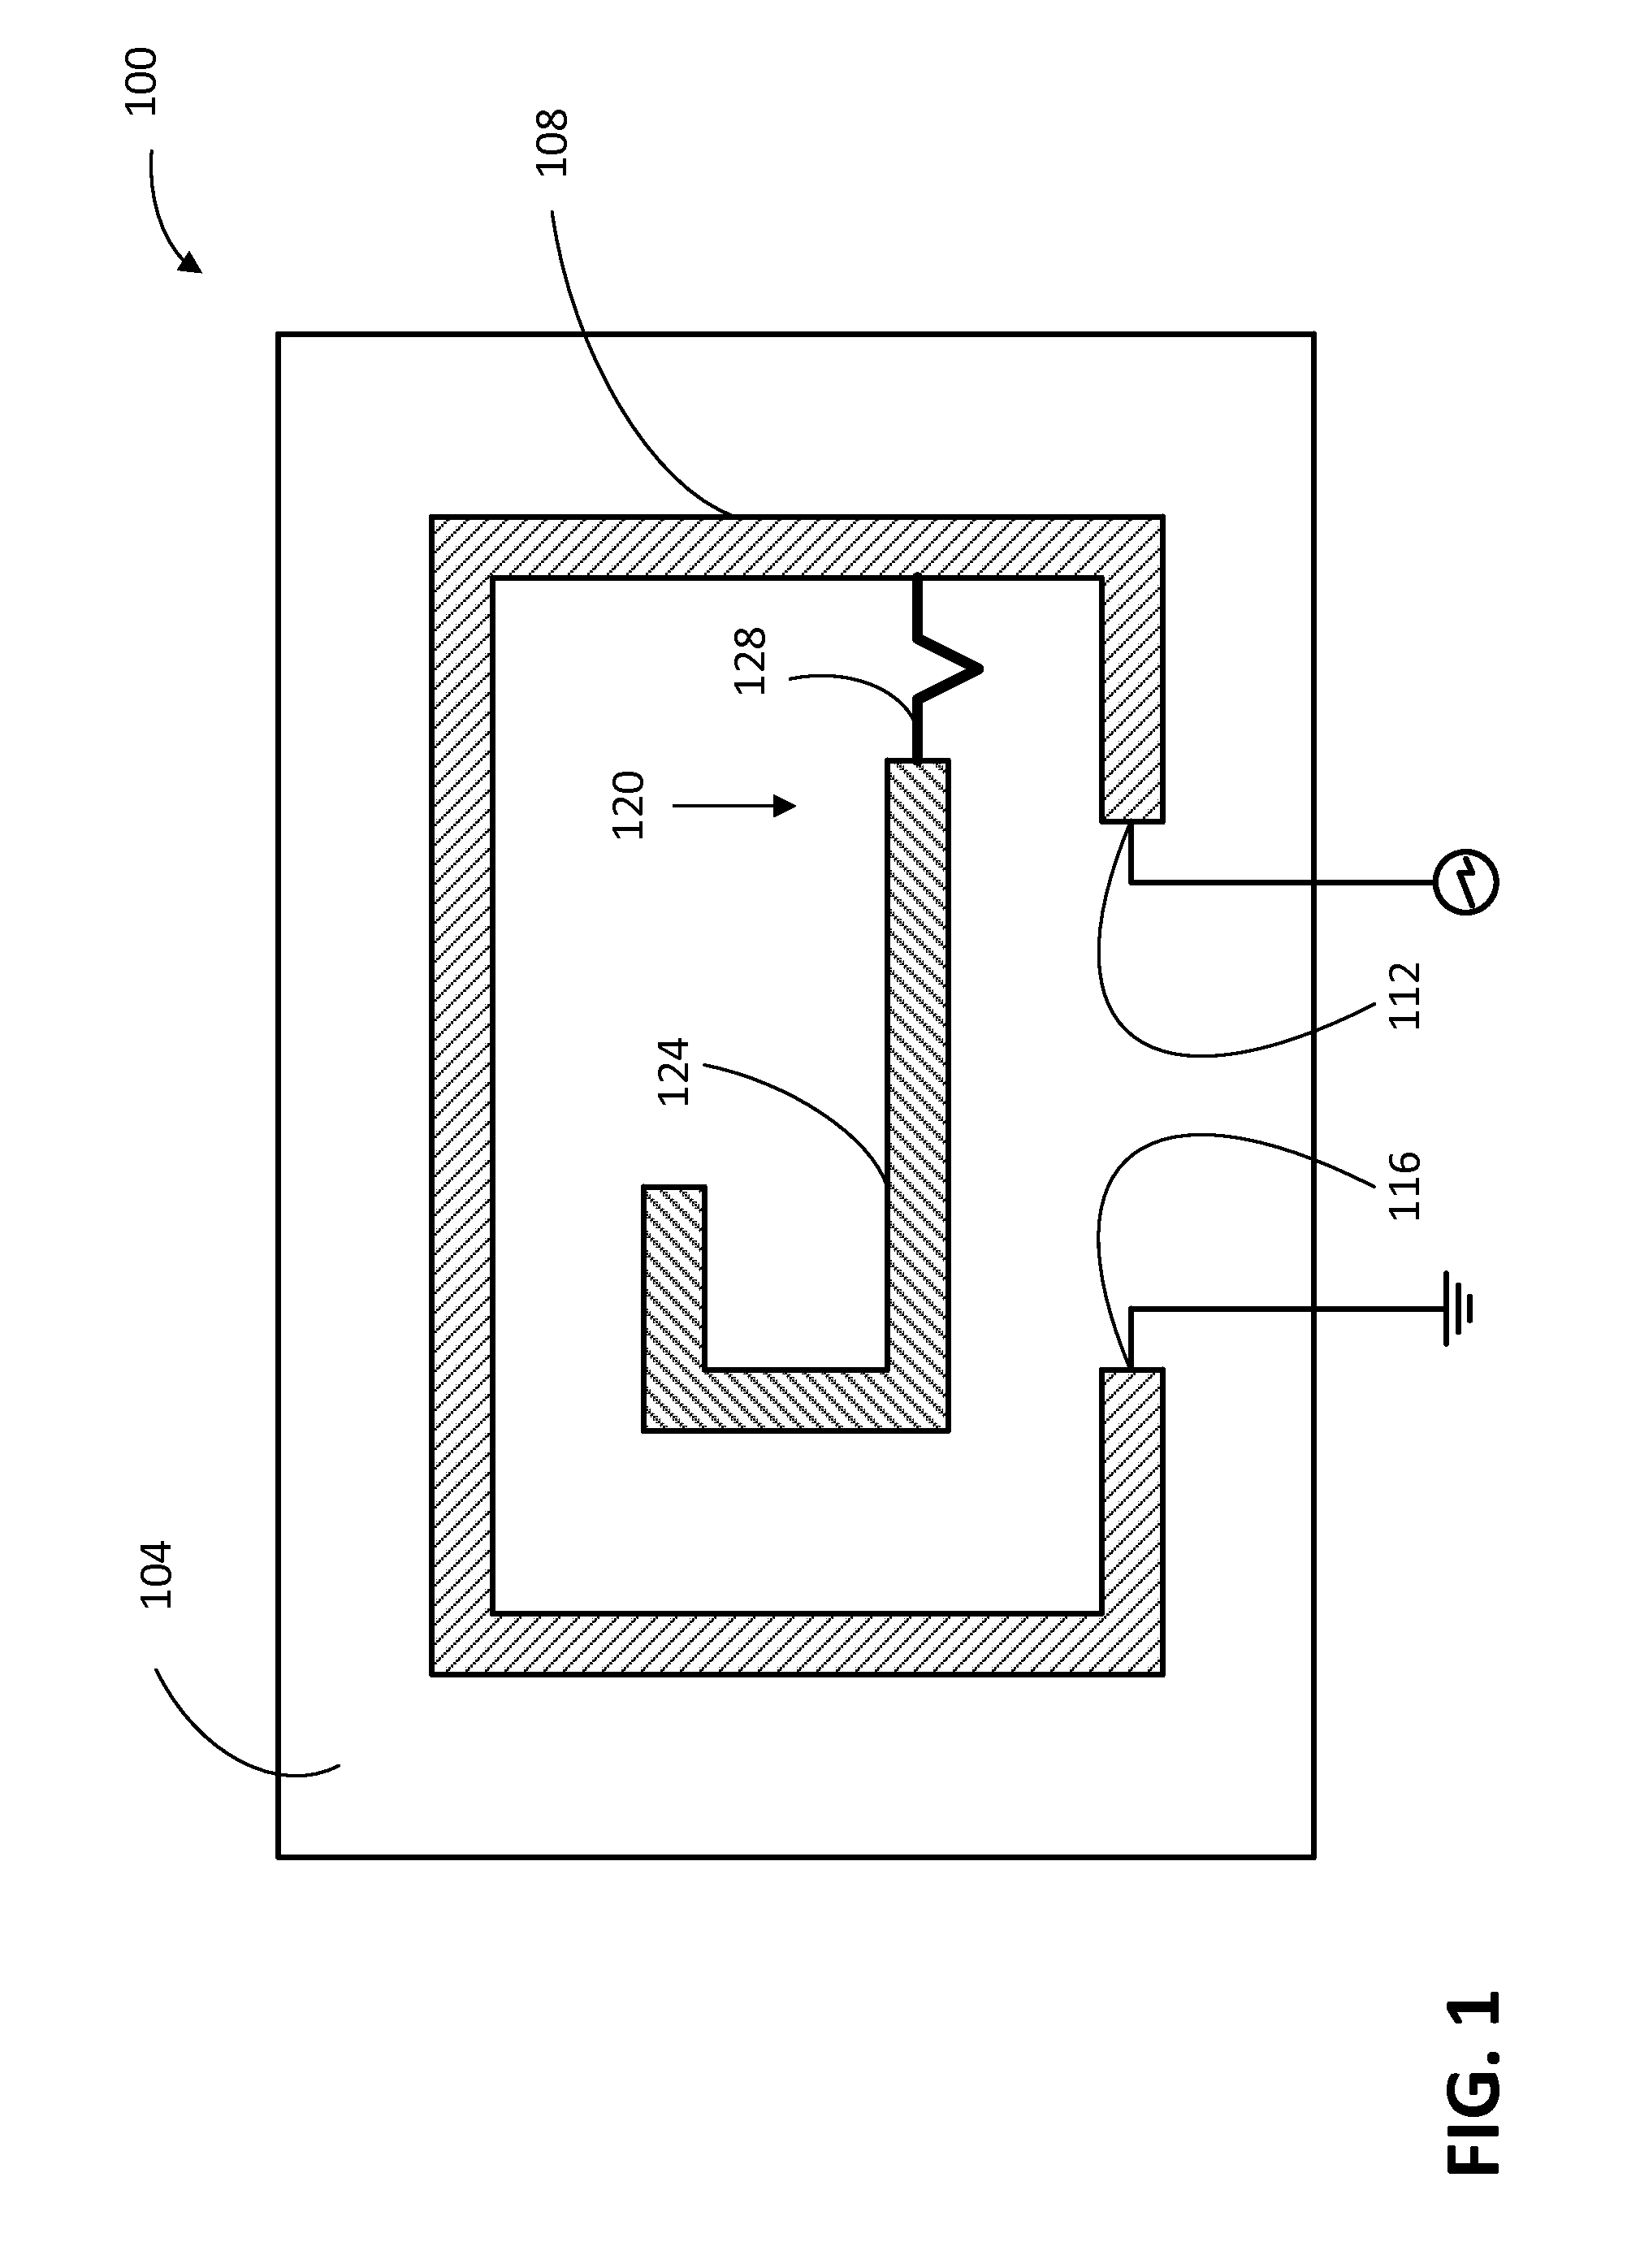 Antenna system using capacitively coupled compound loop antennas with antenna isolation provision